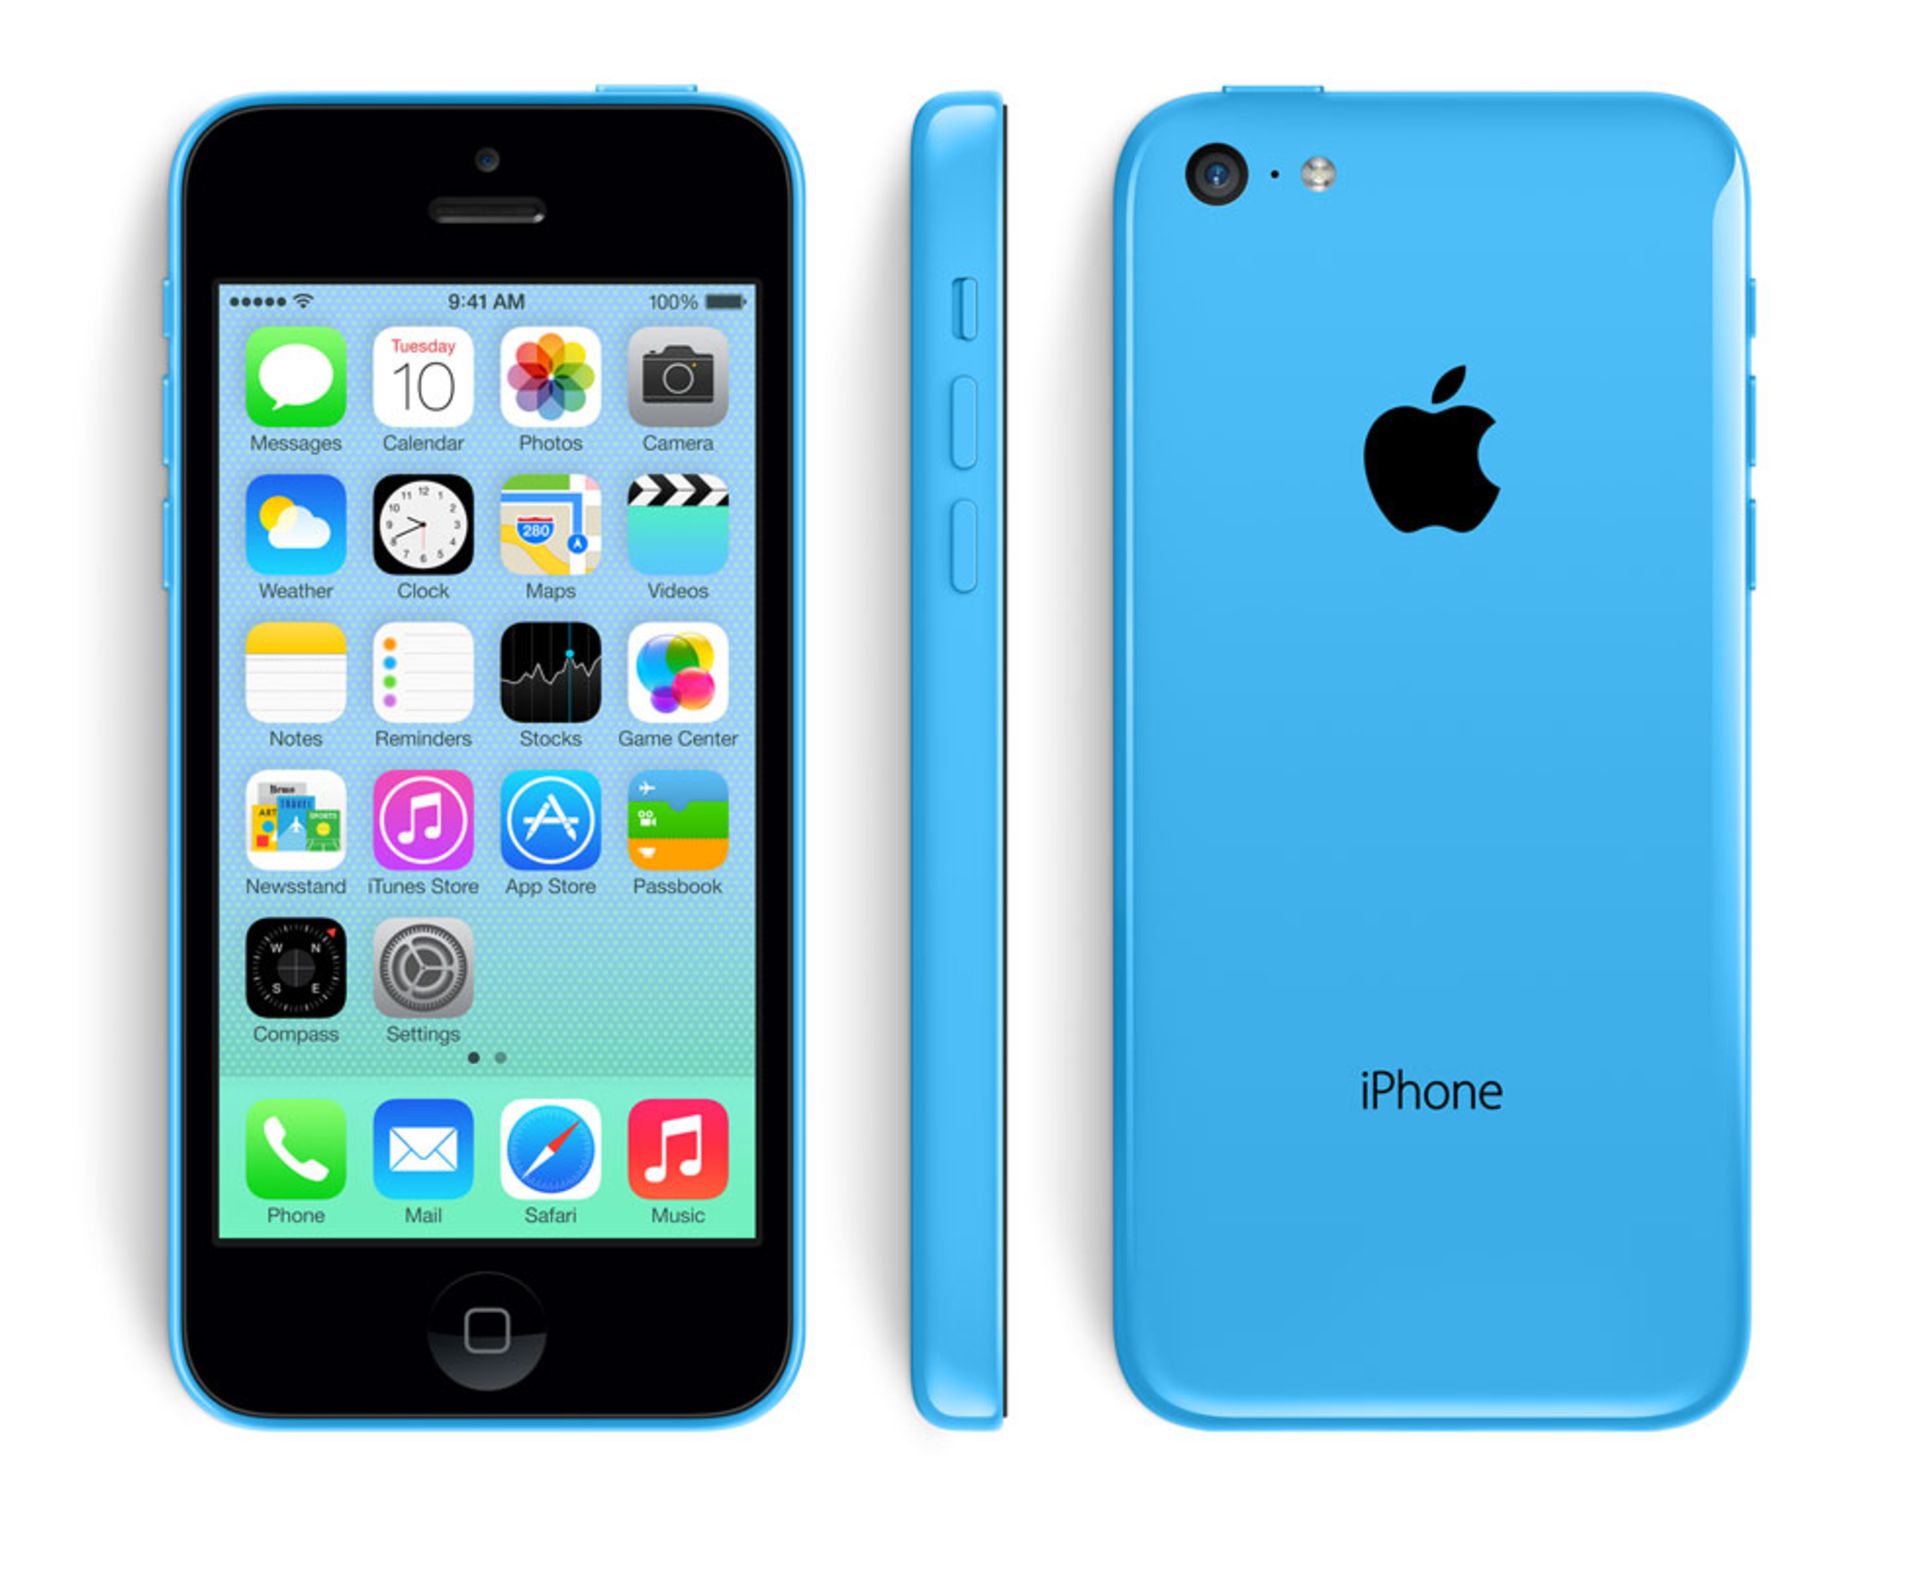 V Grade B Apple iPhone 5C Blue 16GB - Item May Have Light Cosmetic Wear But Will Not Affect The